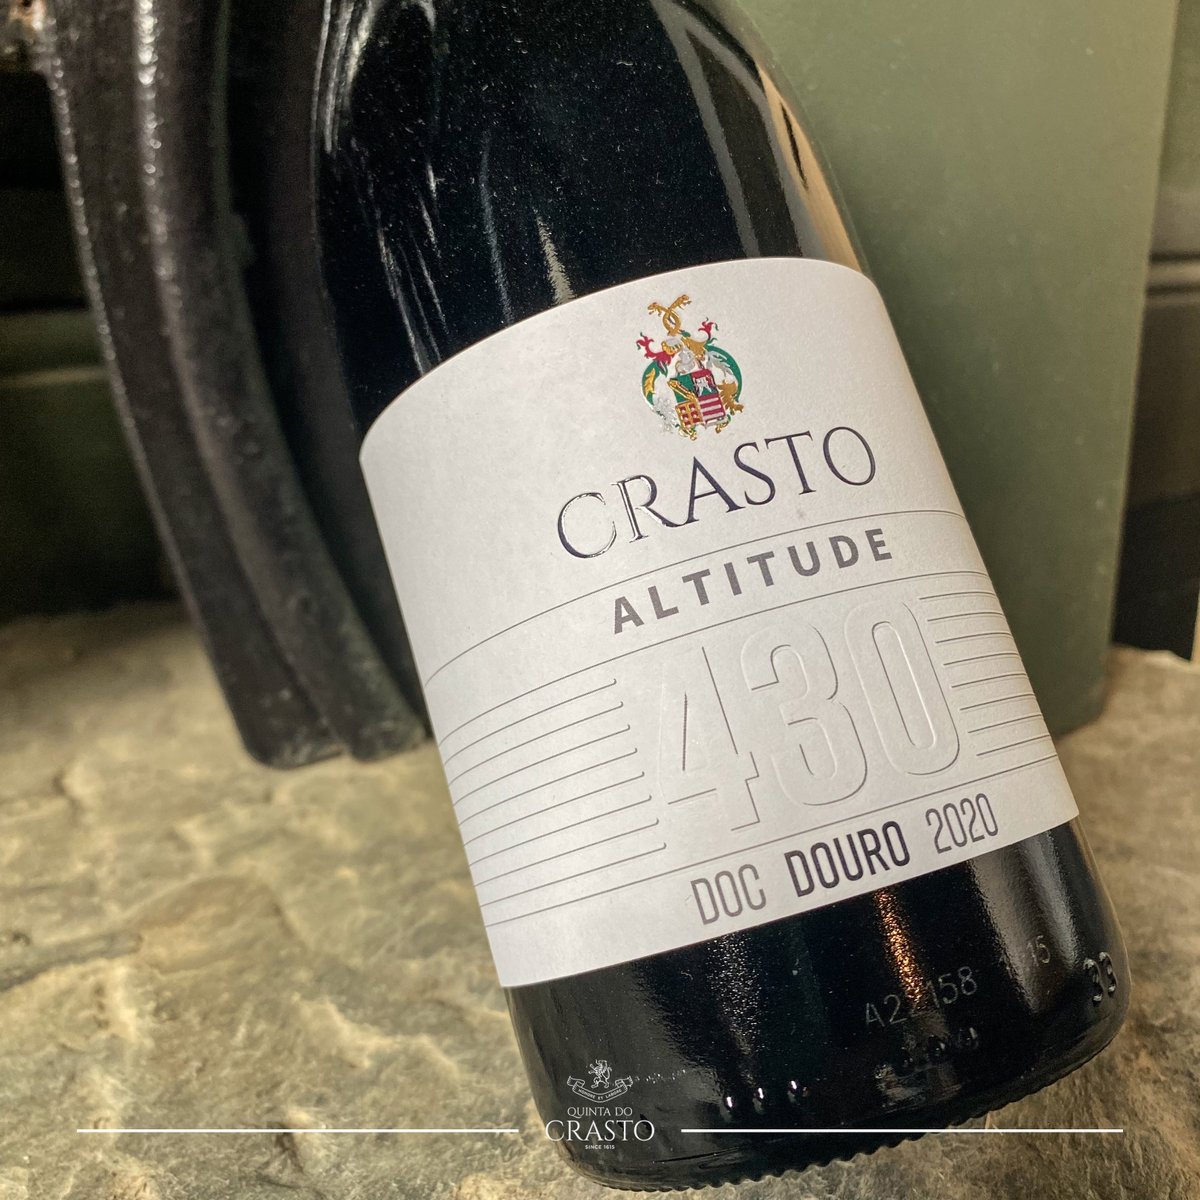 Crasto Altitude 430. A #wine that reflects all the freshness and elegance that #TintaFrancisca and #TourigaNacional grape varieties are able to offer
when planted at 430 metres of altitude with a north-facing exposure. 🍷✨ #Wines 
👉🏼 Find out more here:
quintadocrasto.pt/crasto-altitud…